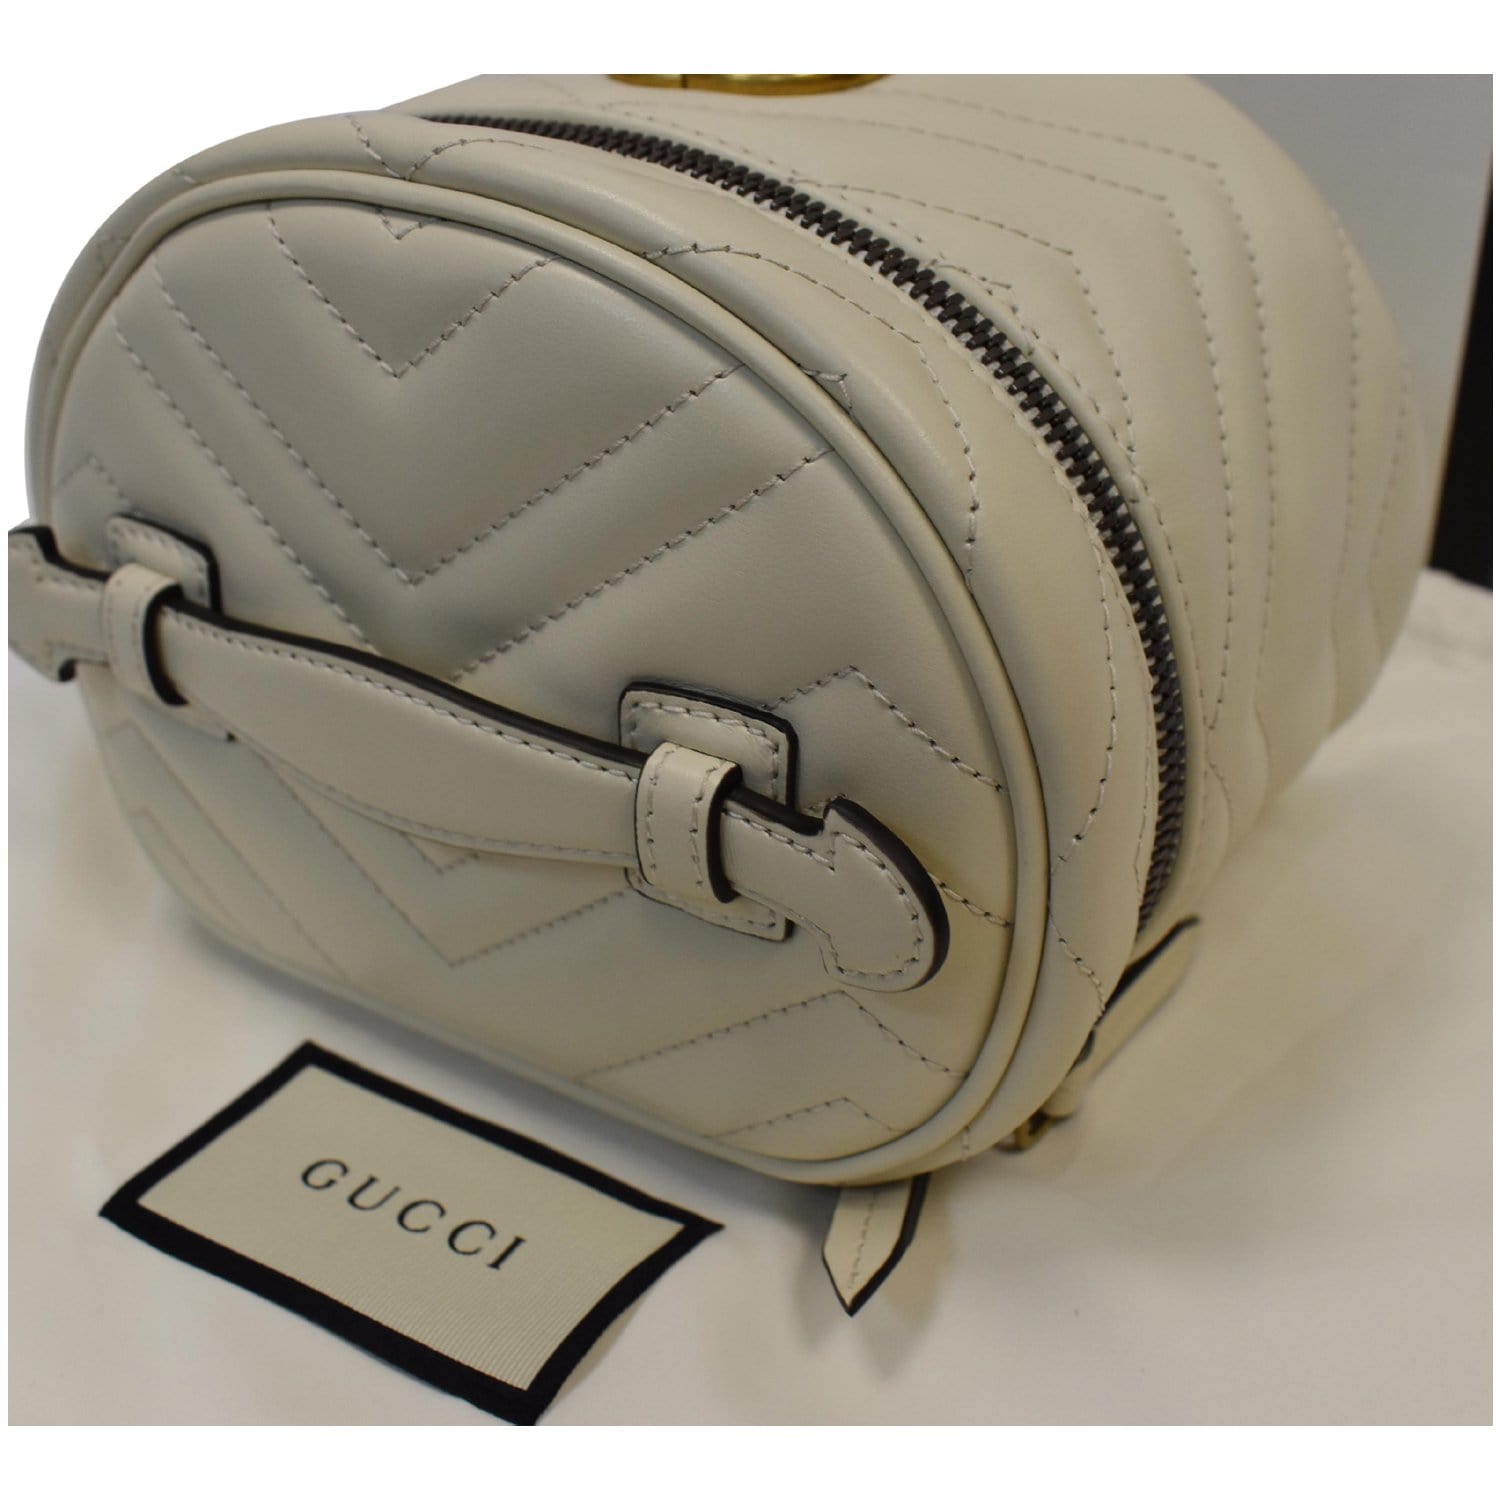 Authenticated Used GUCCI Gucci Pouch 510341 GG Nylon Leather Navy Silver  Metal Fittings Makeup Multi Case Accessory 